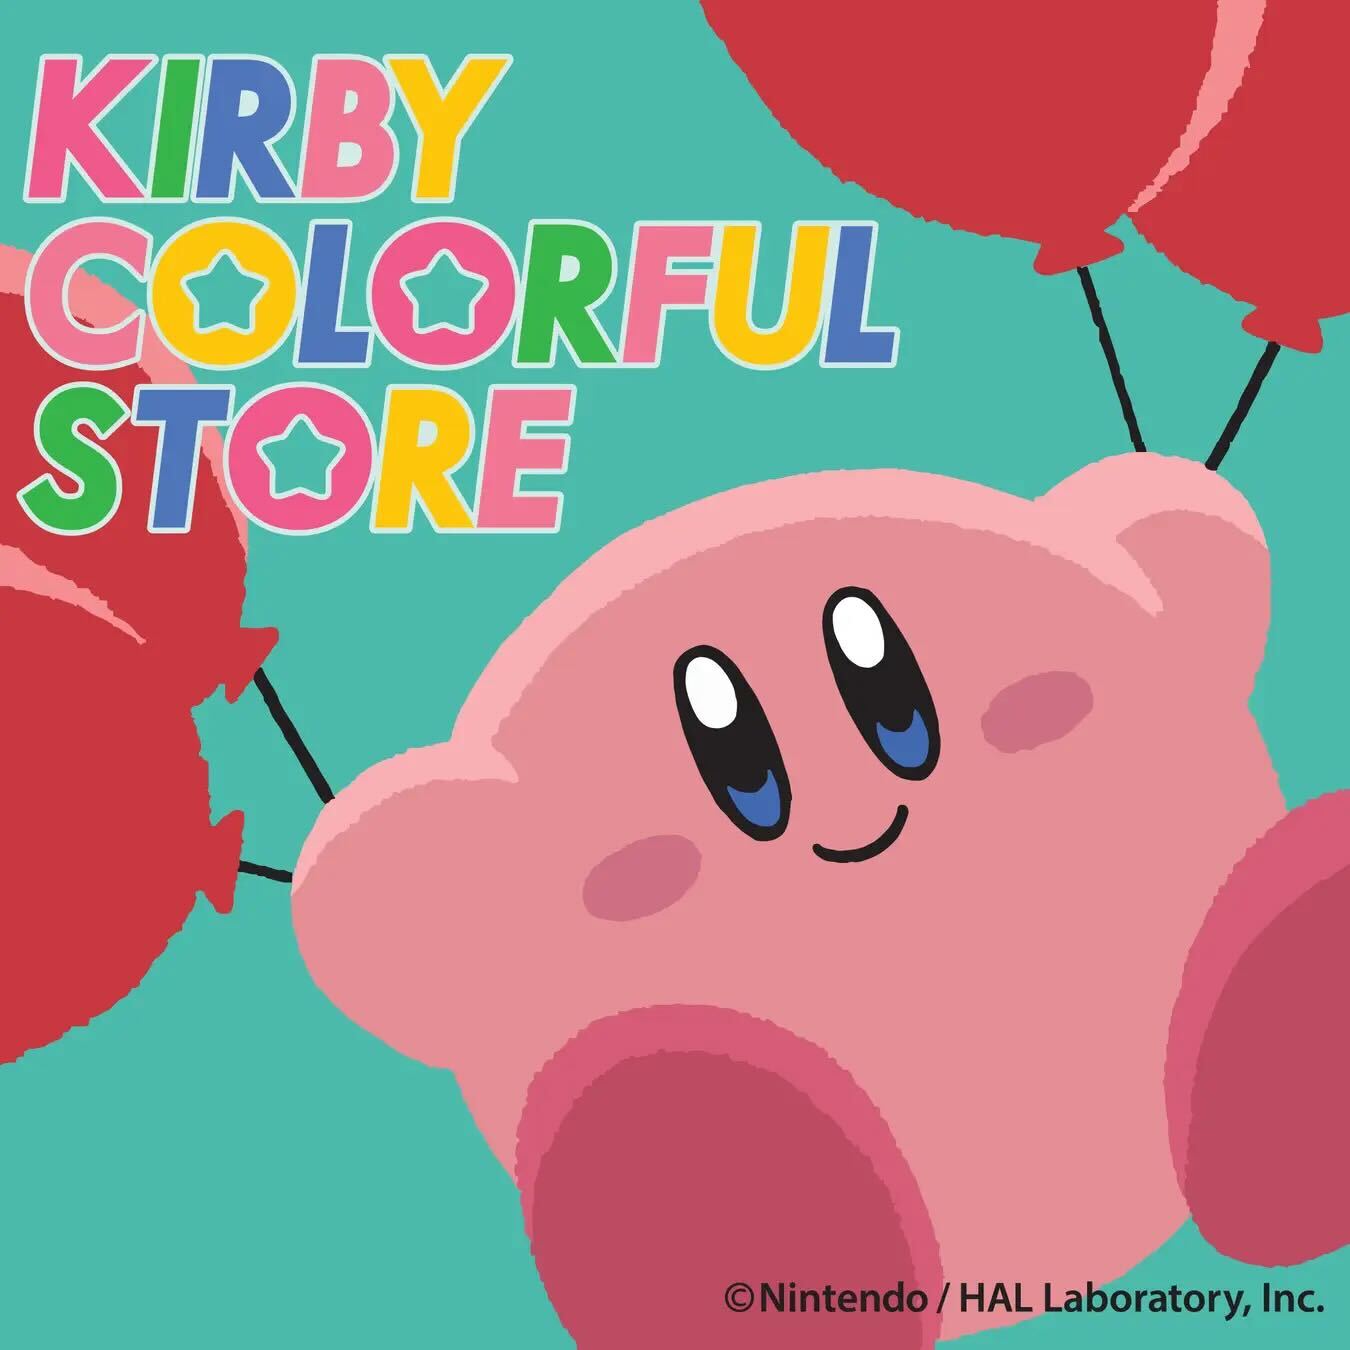  KIRBY COLORFUL STORE